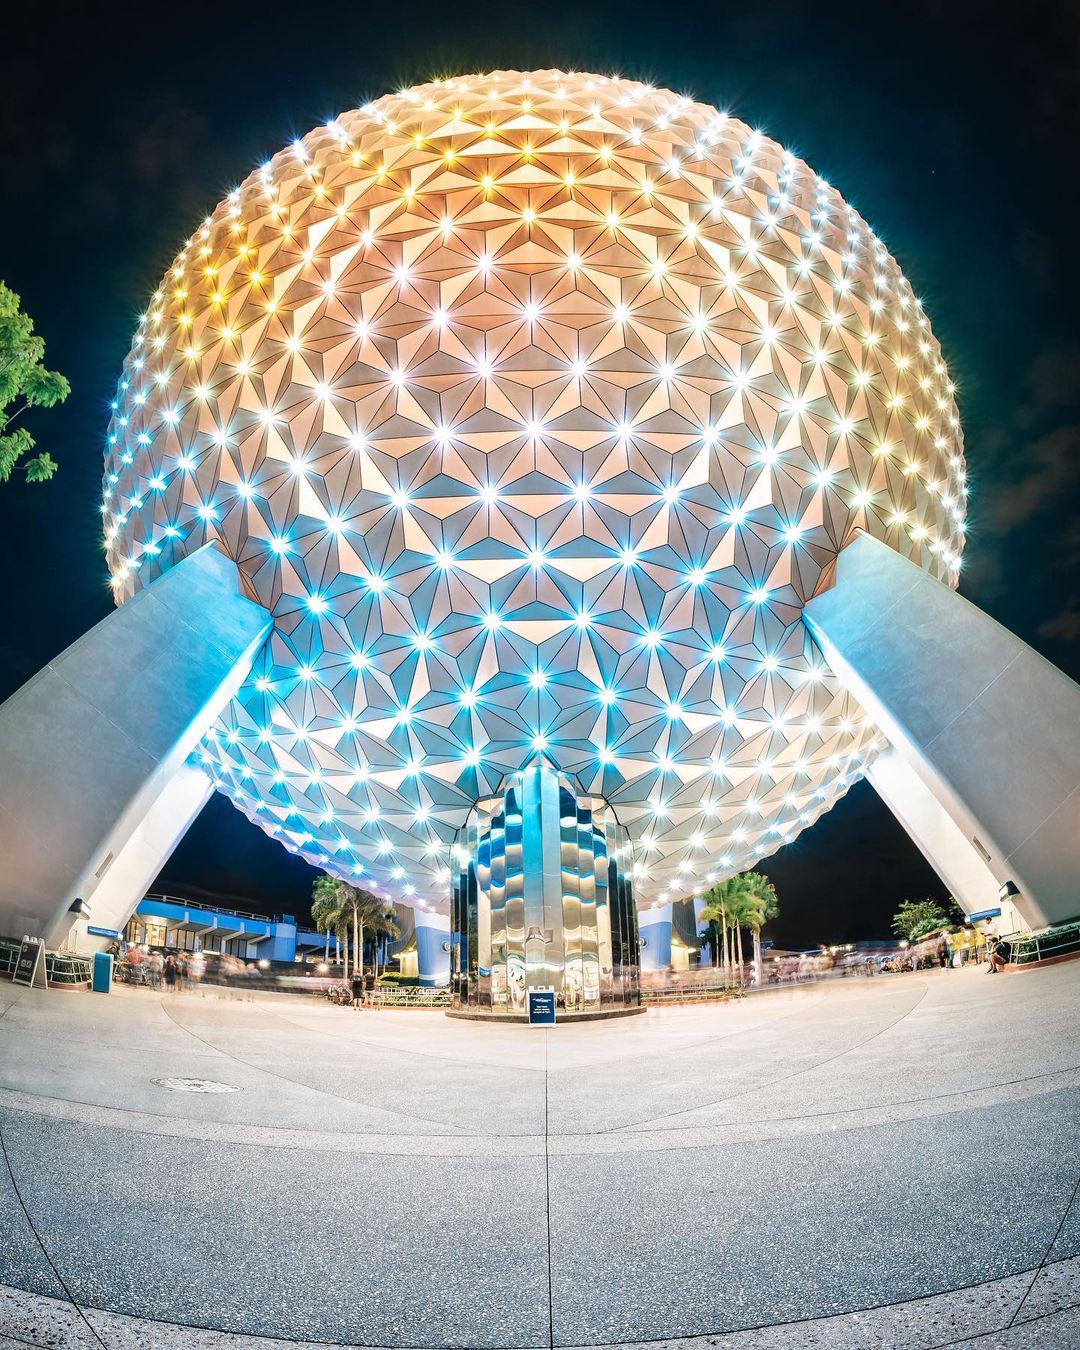 Epcot's Best Rides and Attractions